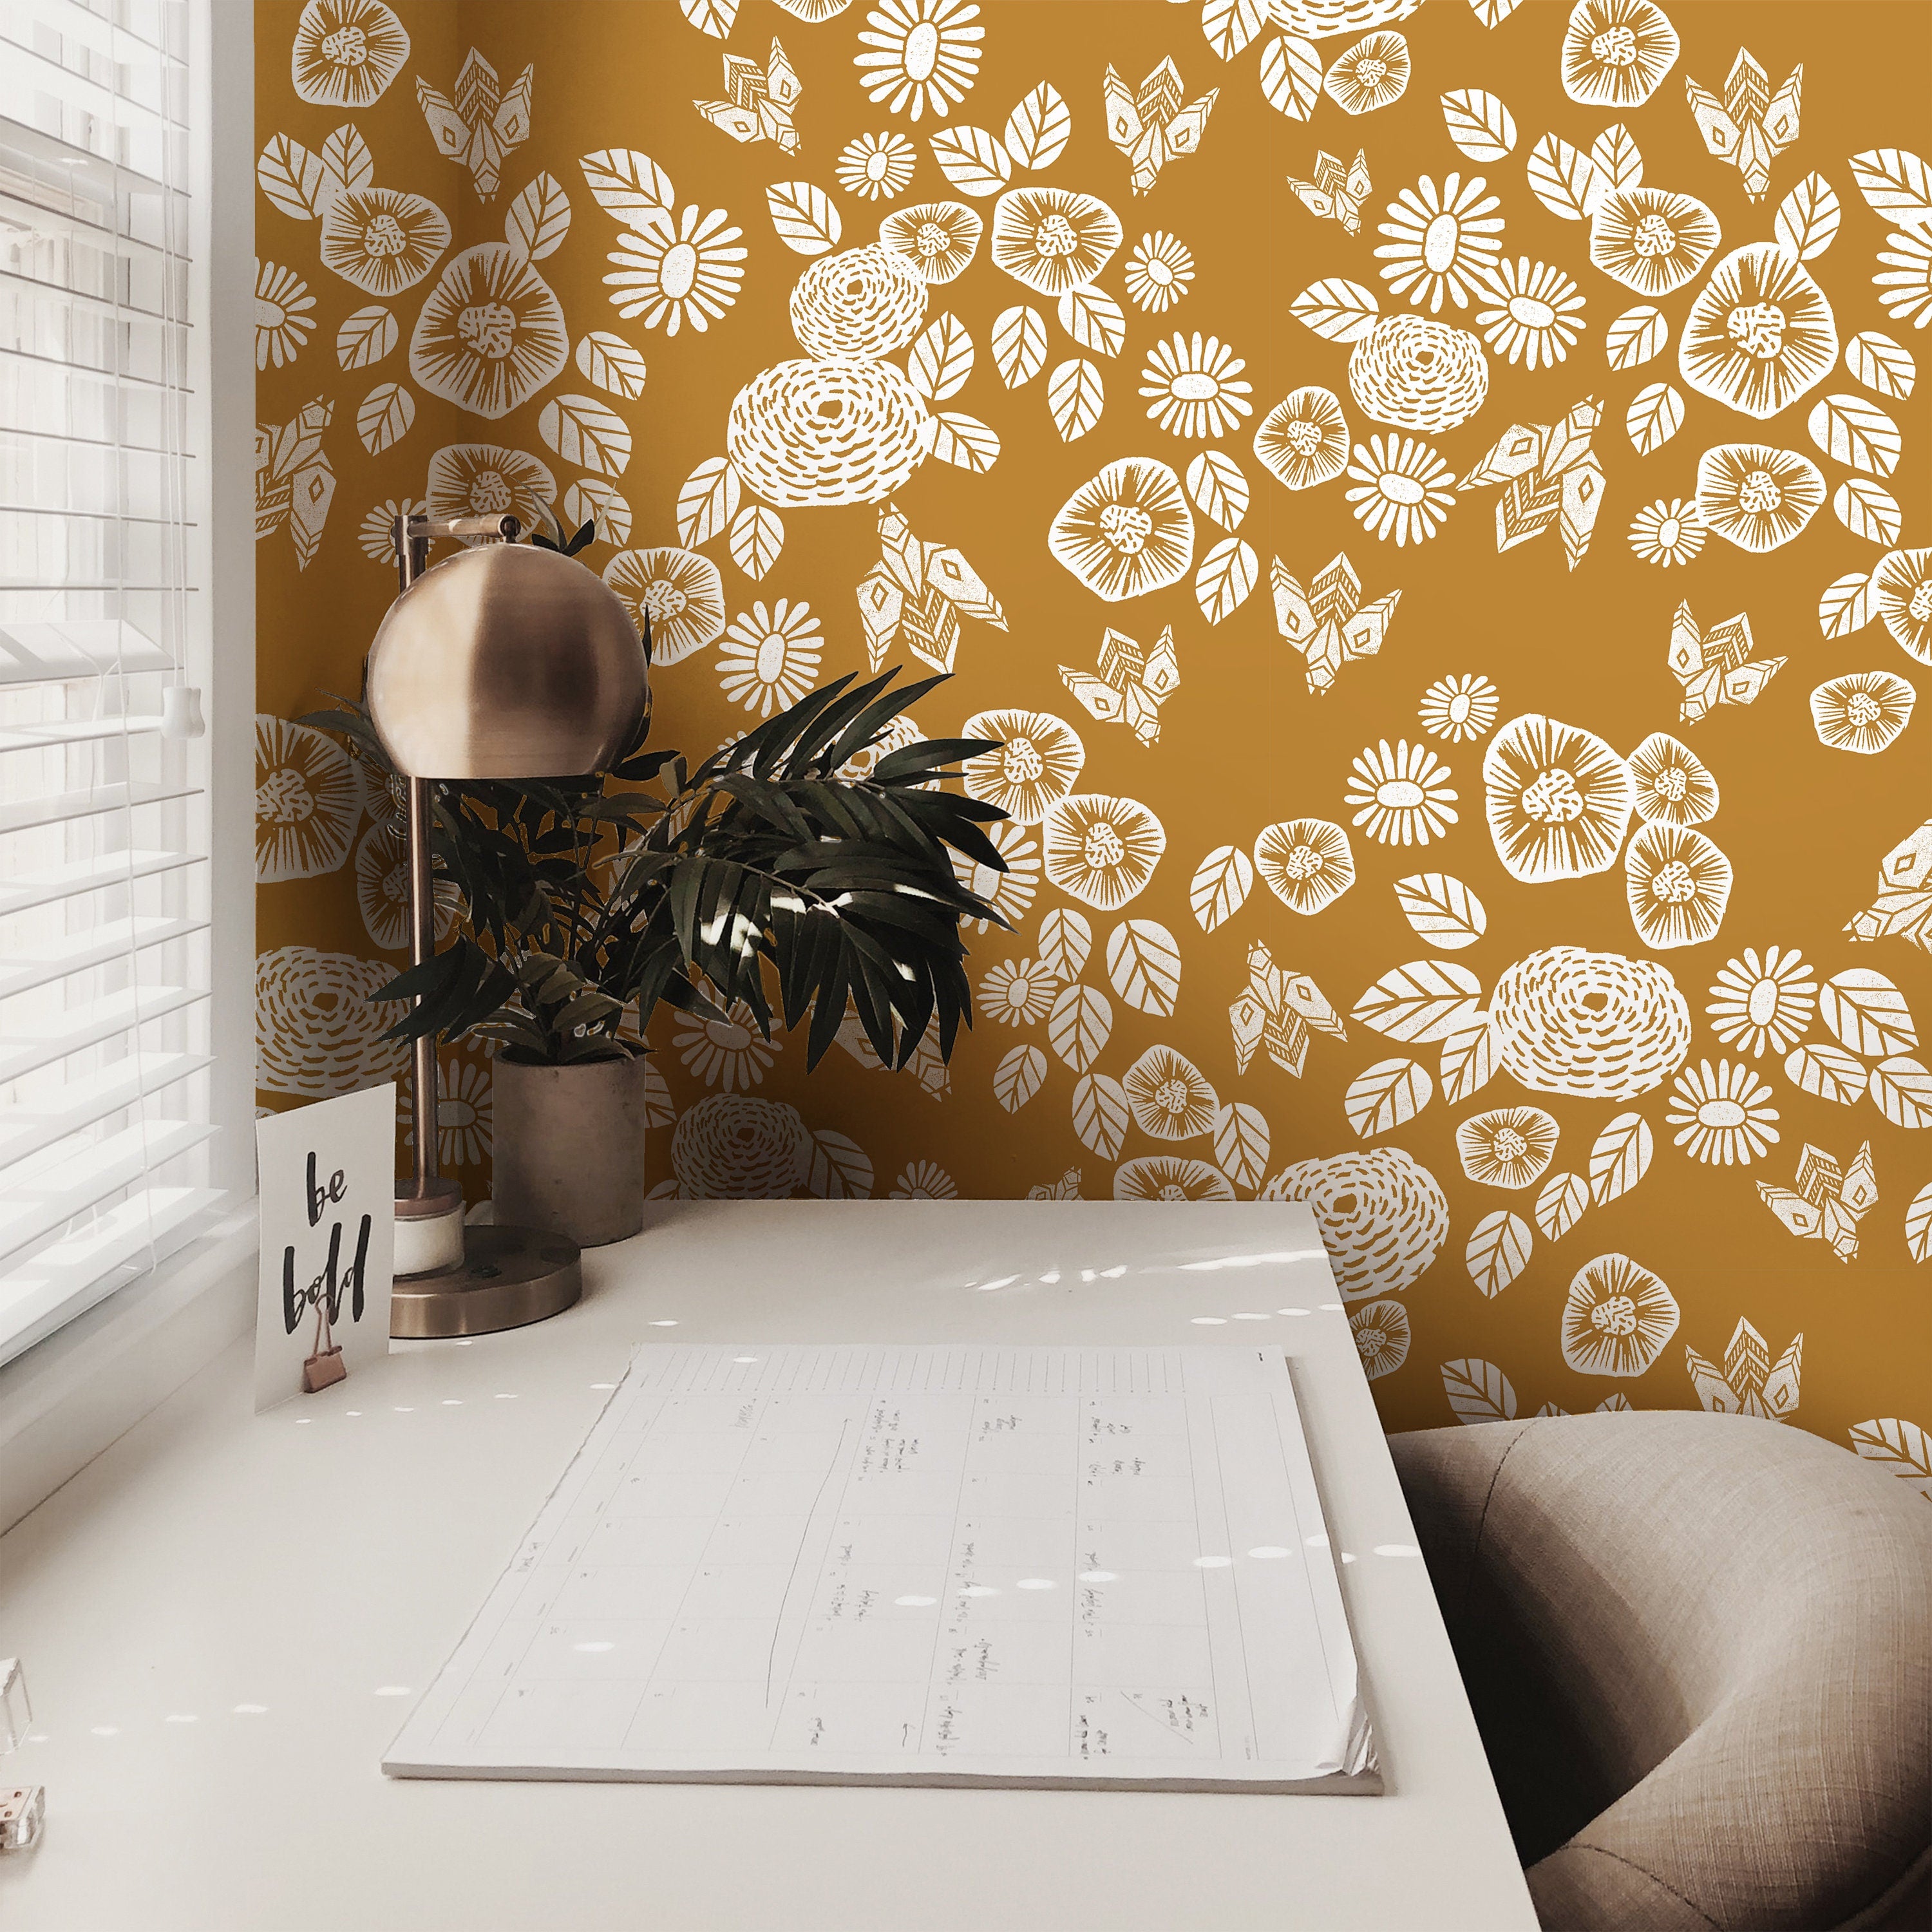 Wallpaper Peel and Stick Wallpaper Golden Yellow And White Floral Boho Removable Wallpaper Wall Decor Home Decor Wall Art Room Decor 3772 - JamesAndColors